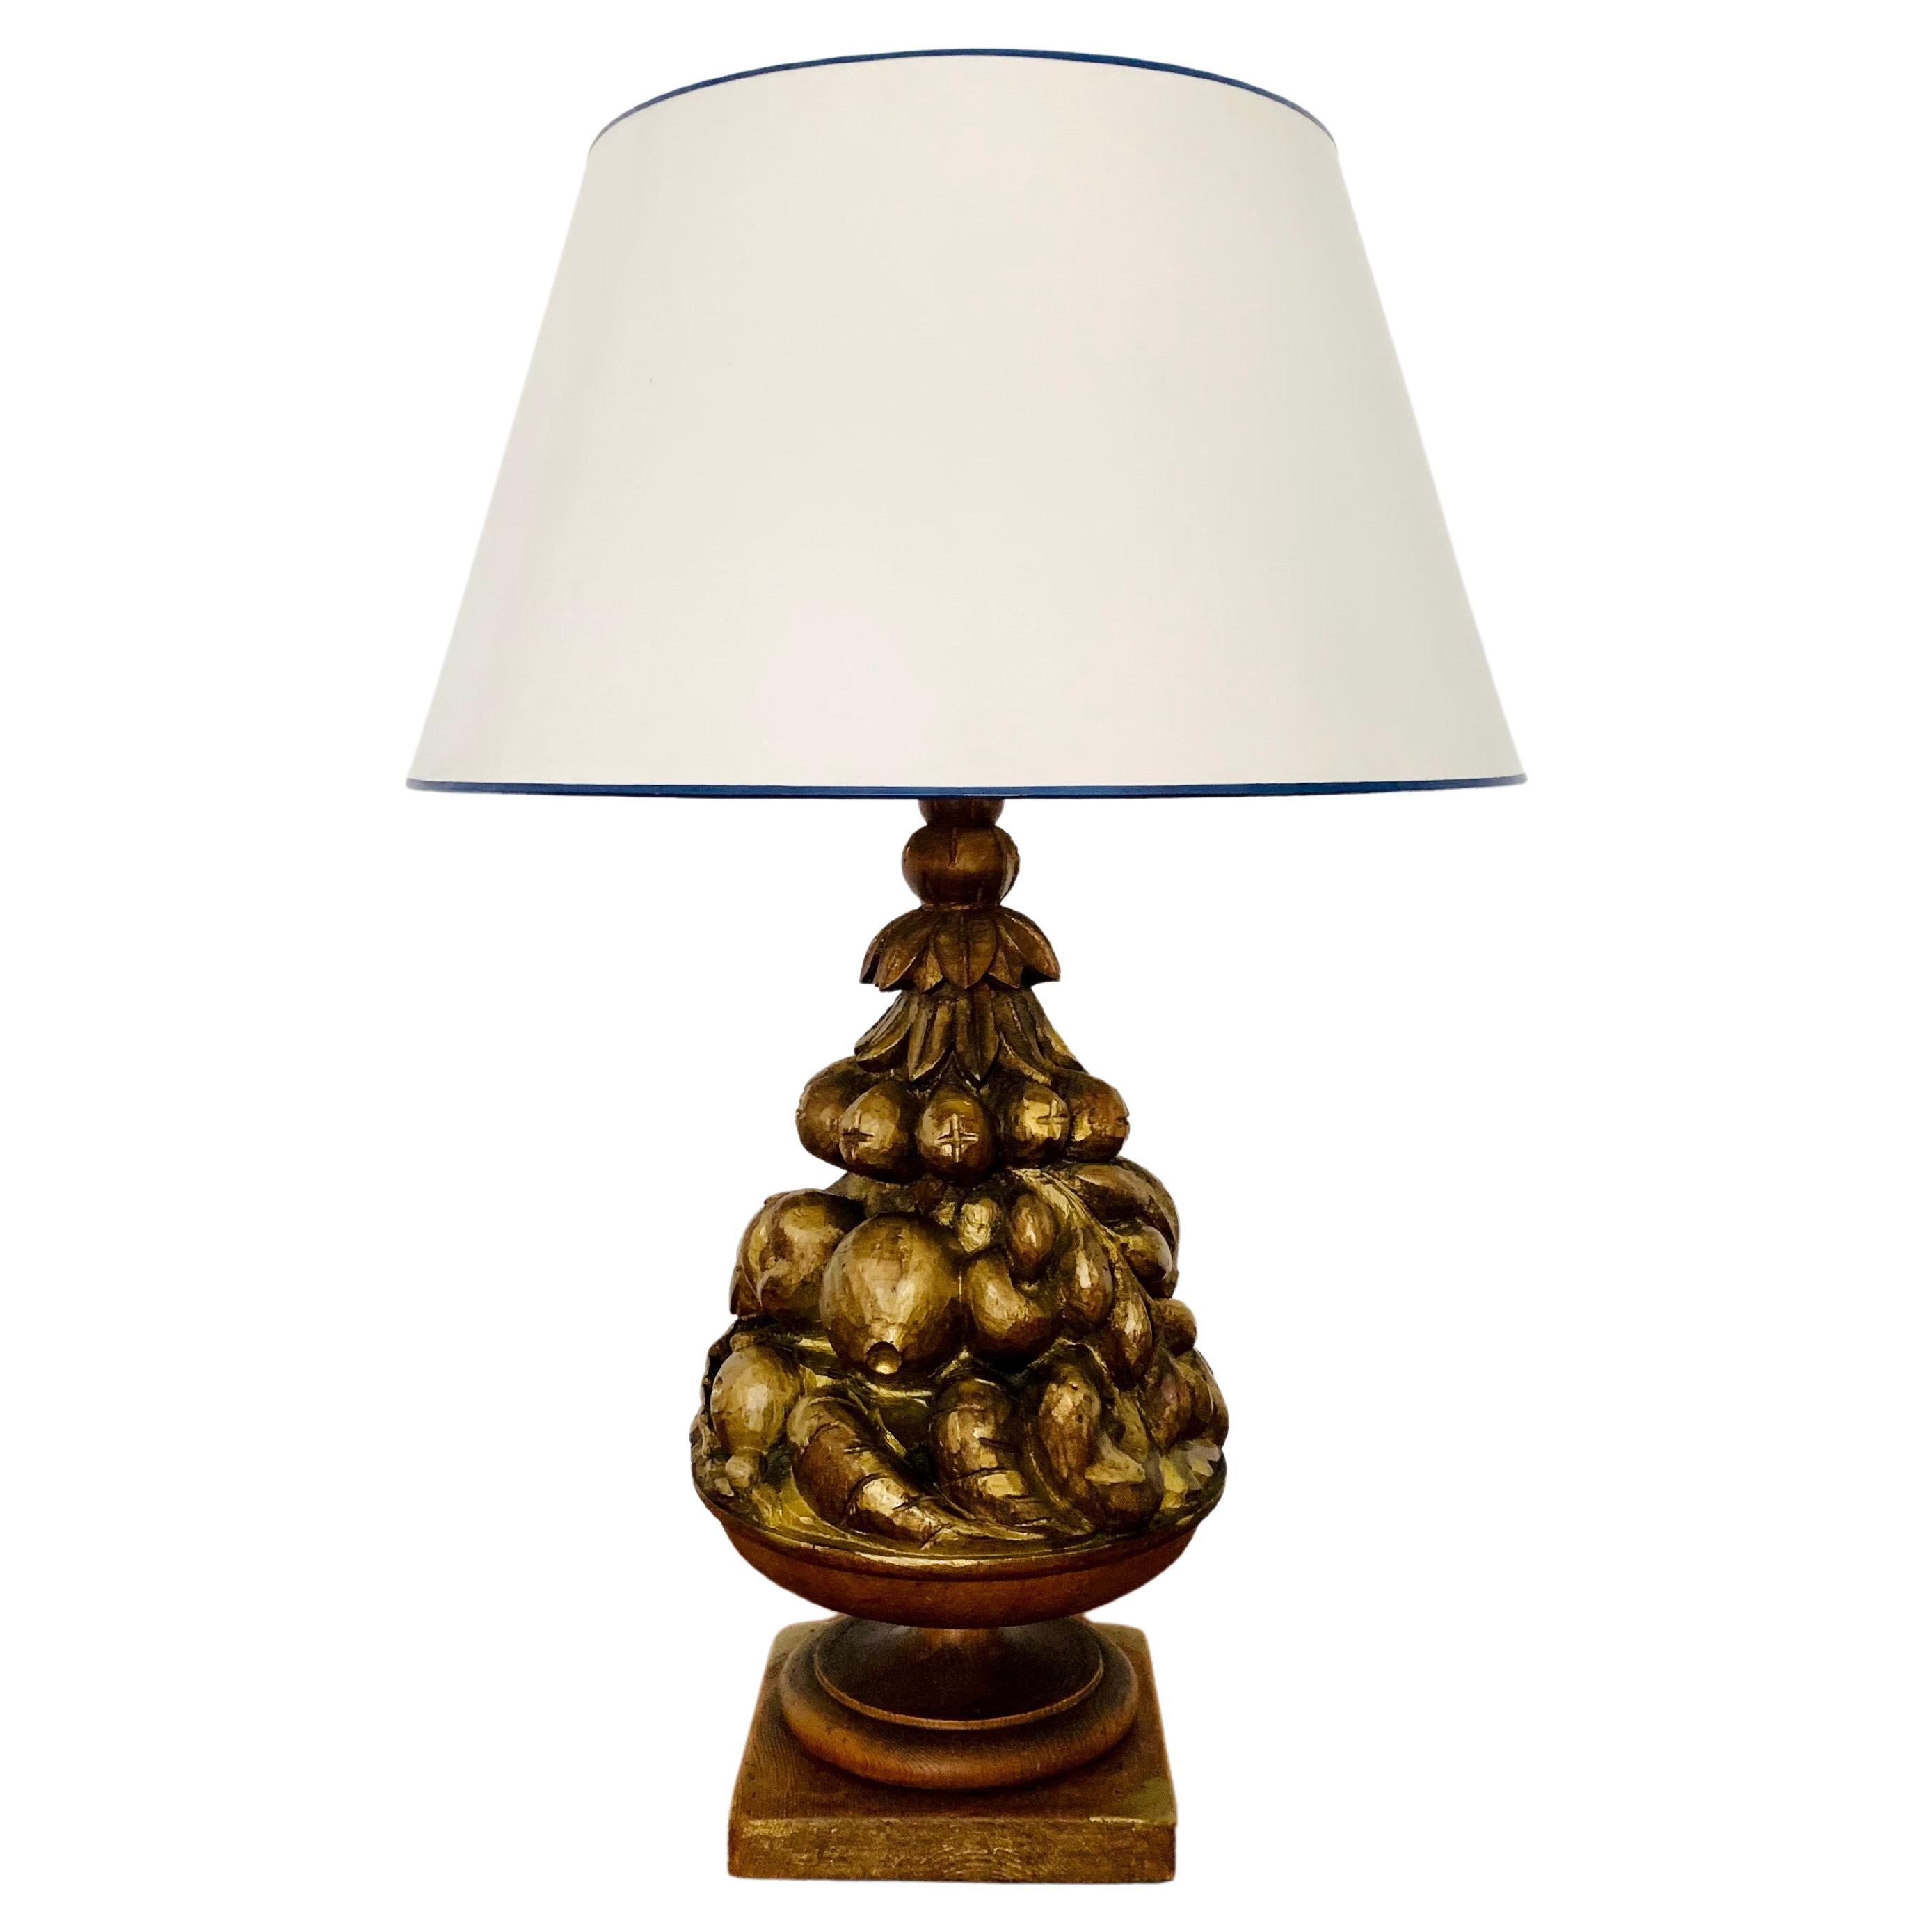 Large Wooden Hollywood Regency Table Lamp